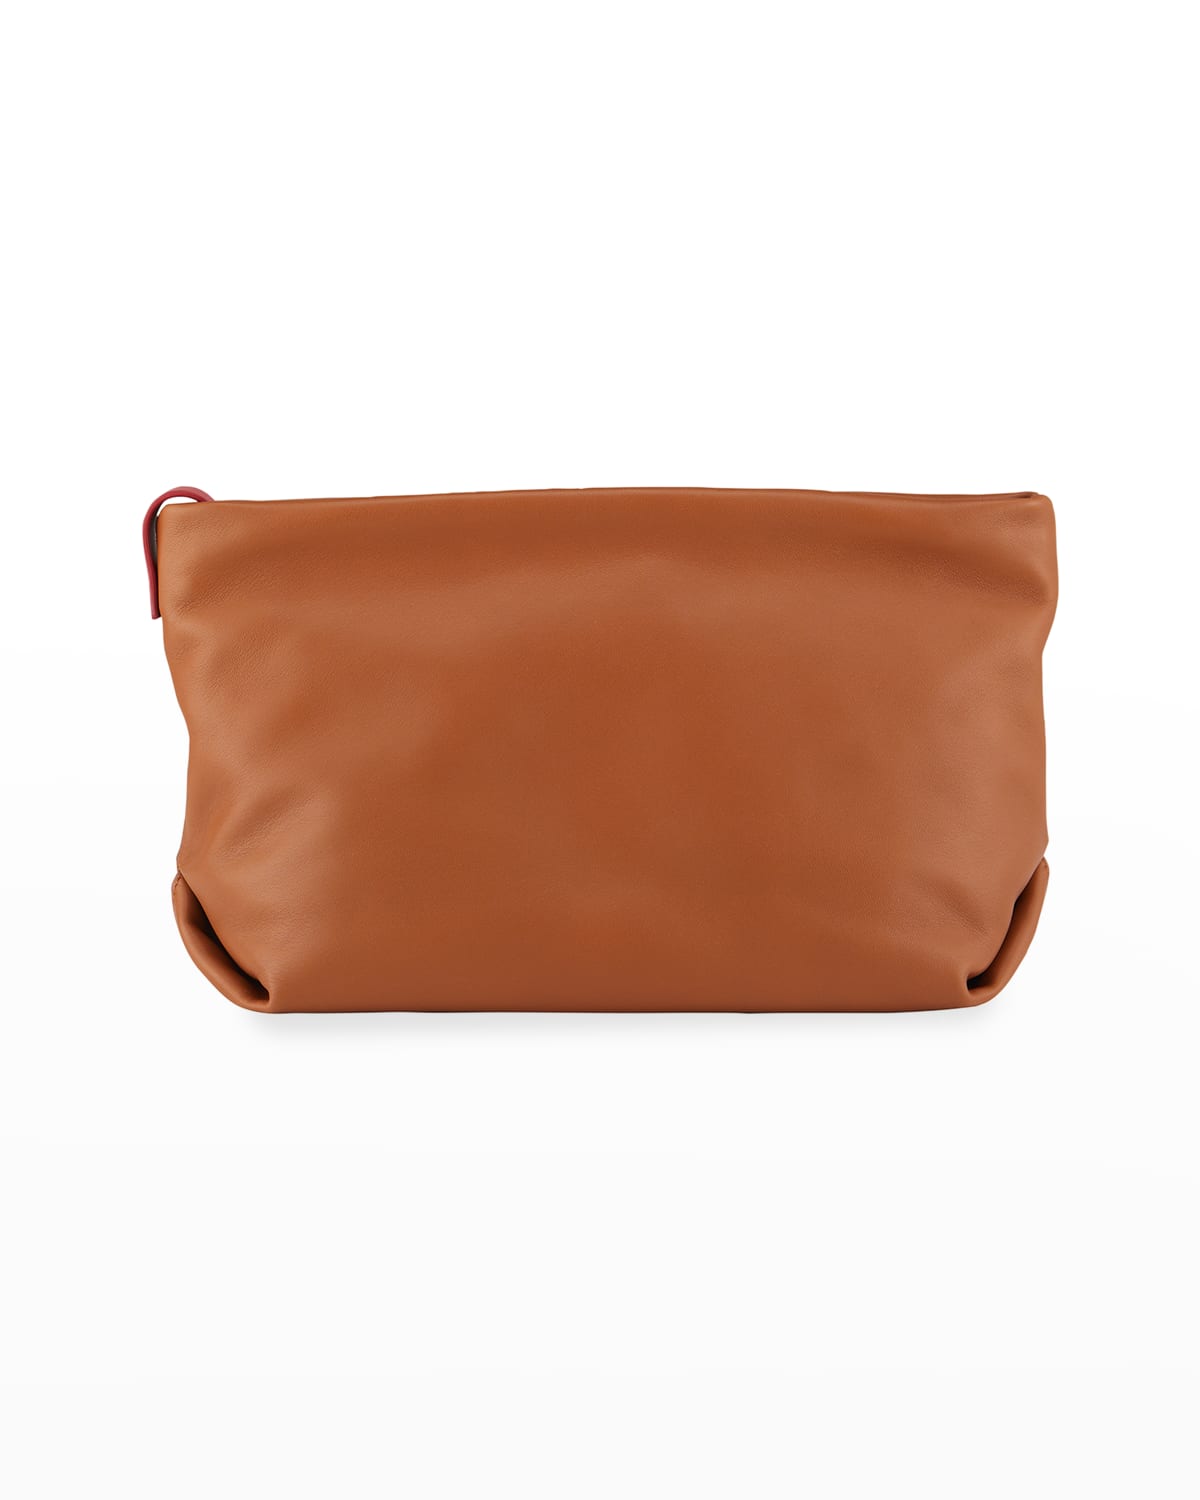 Inside-Out Soft Napa Leather Clutch